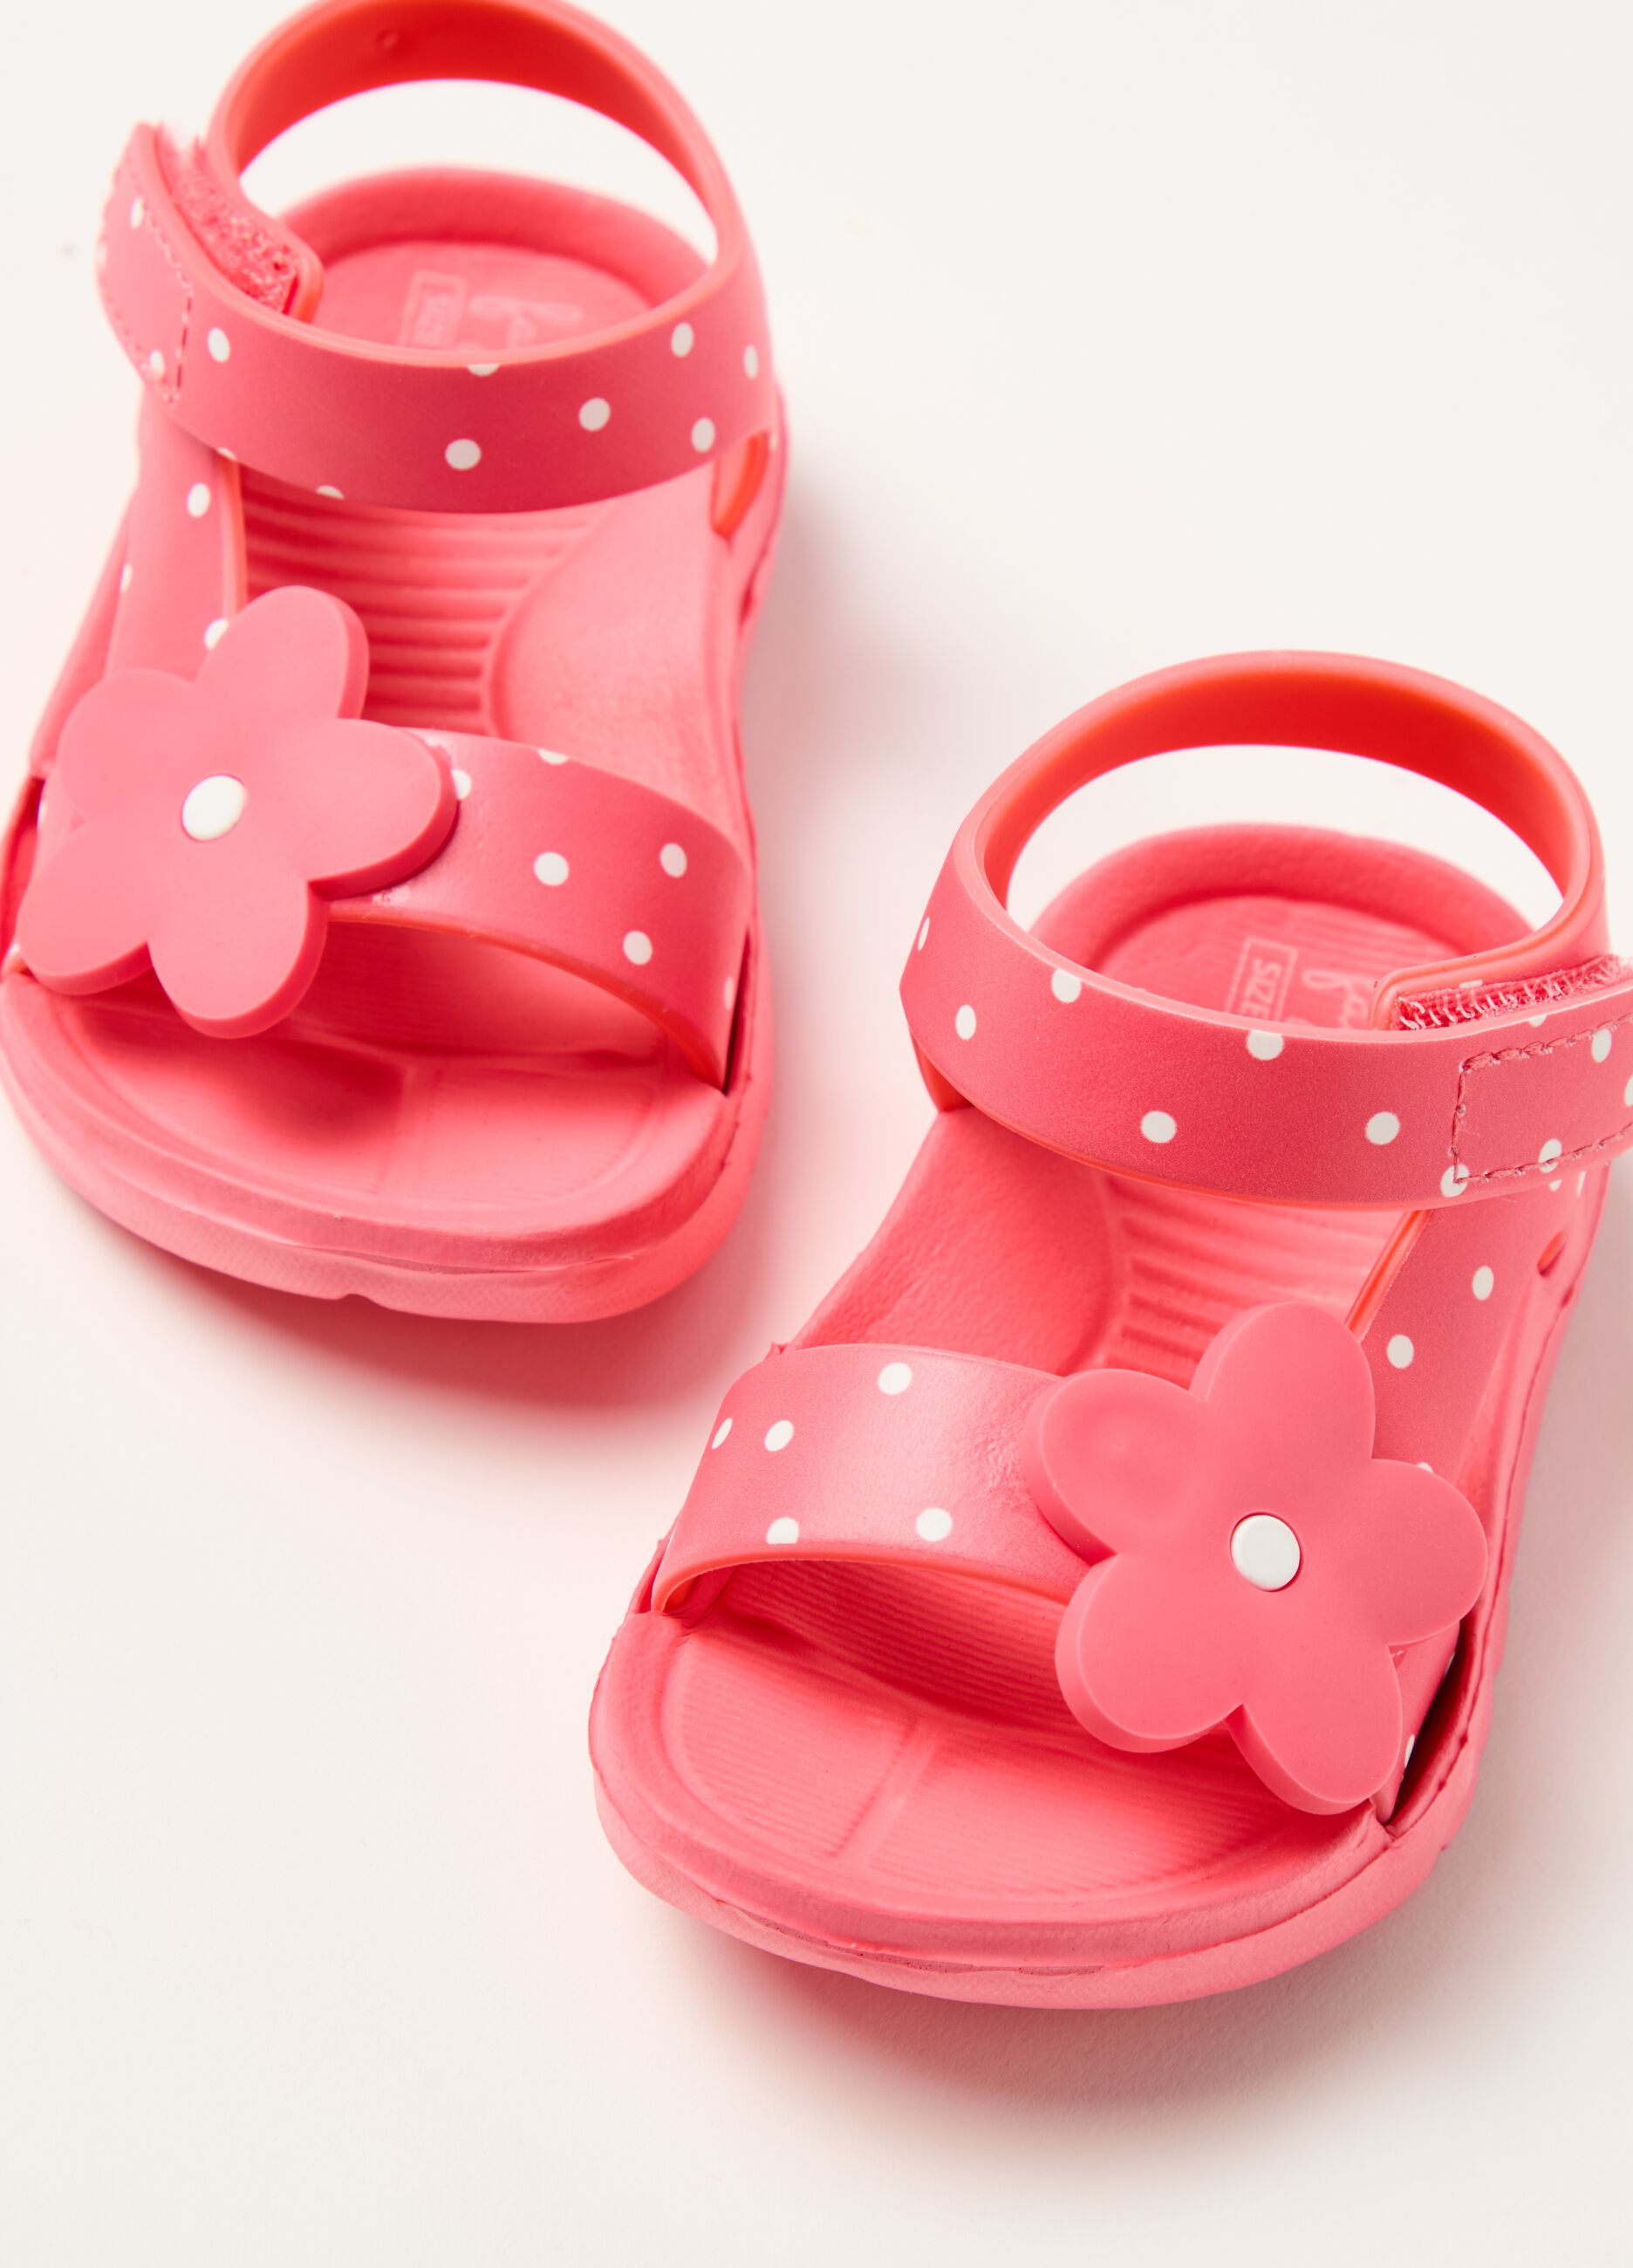 Sandals with polka dot pattern and flower